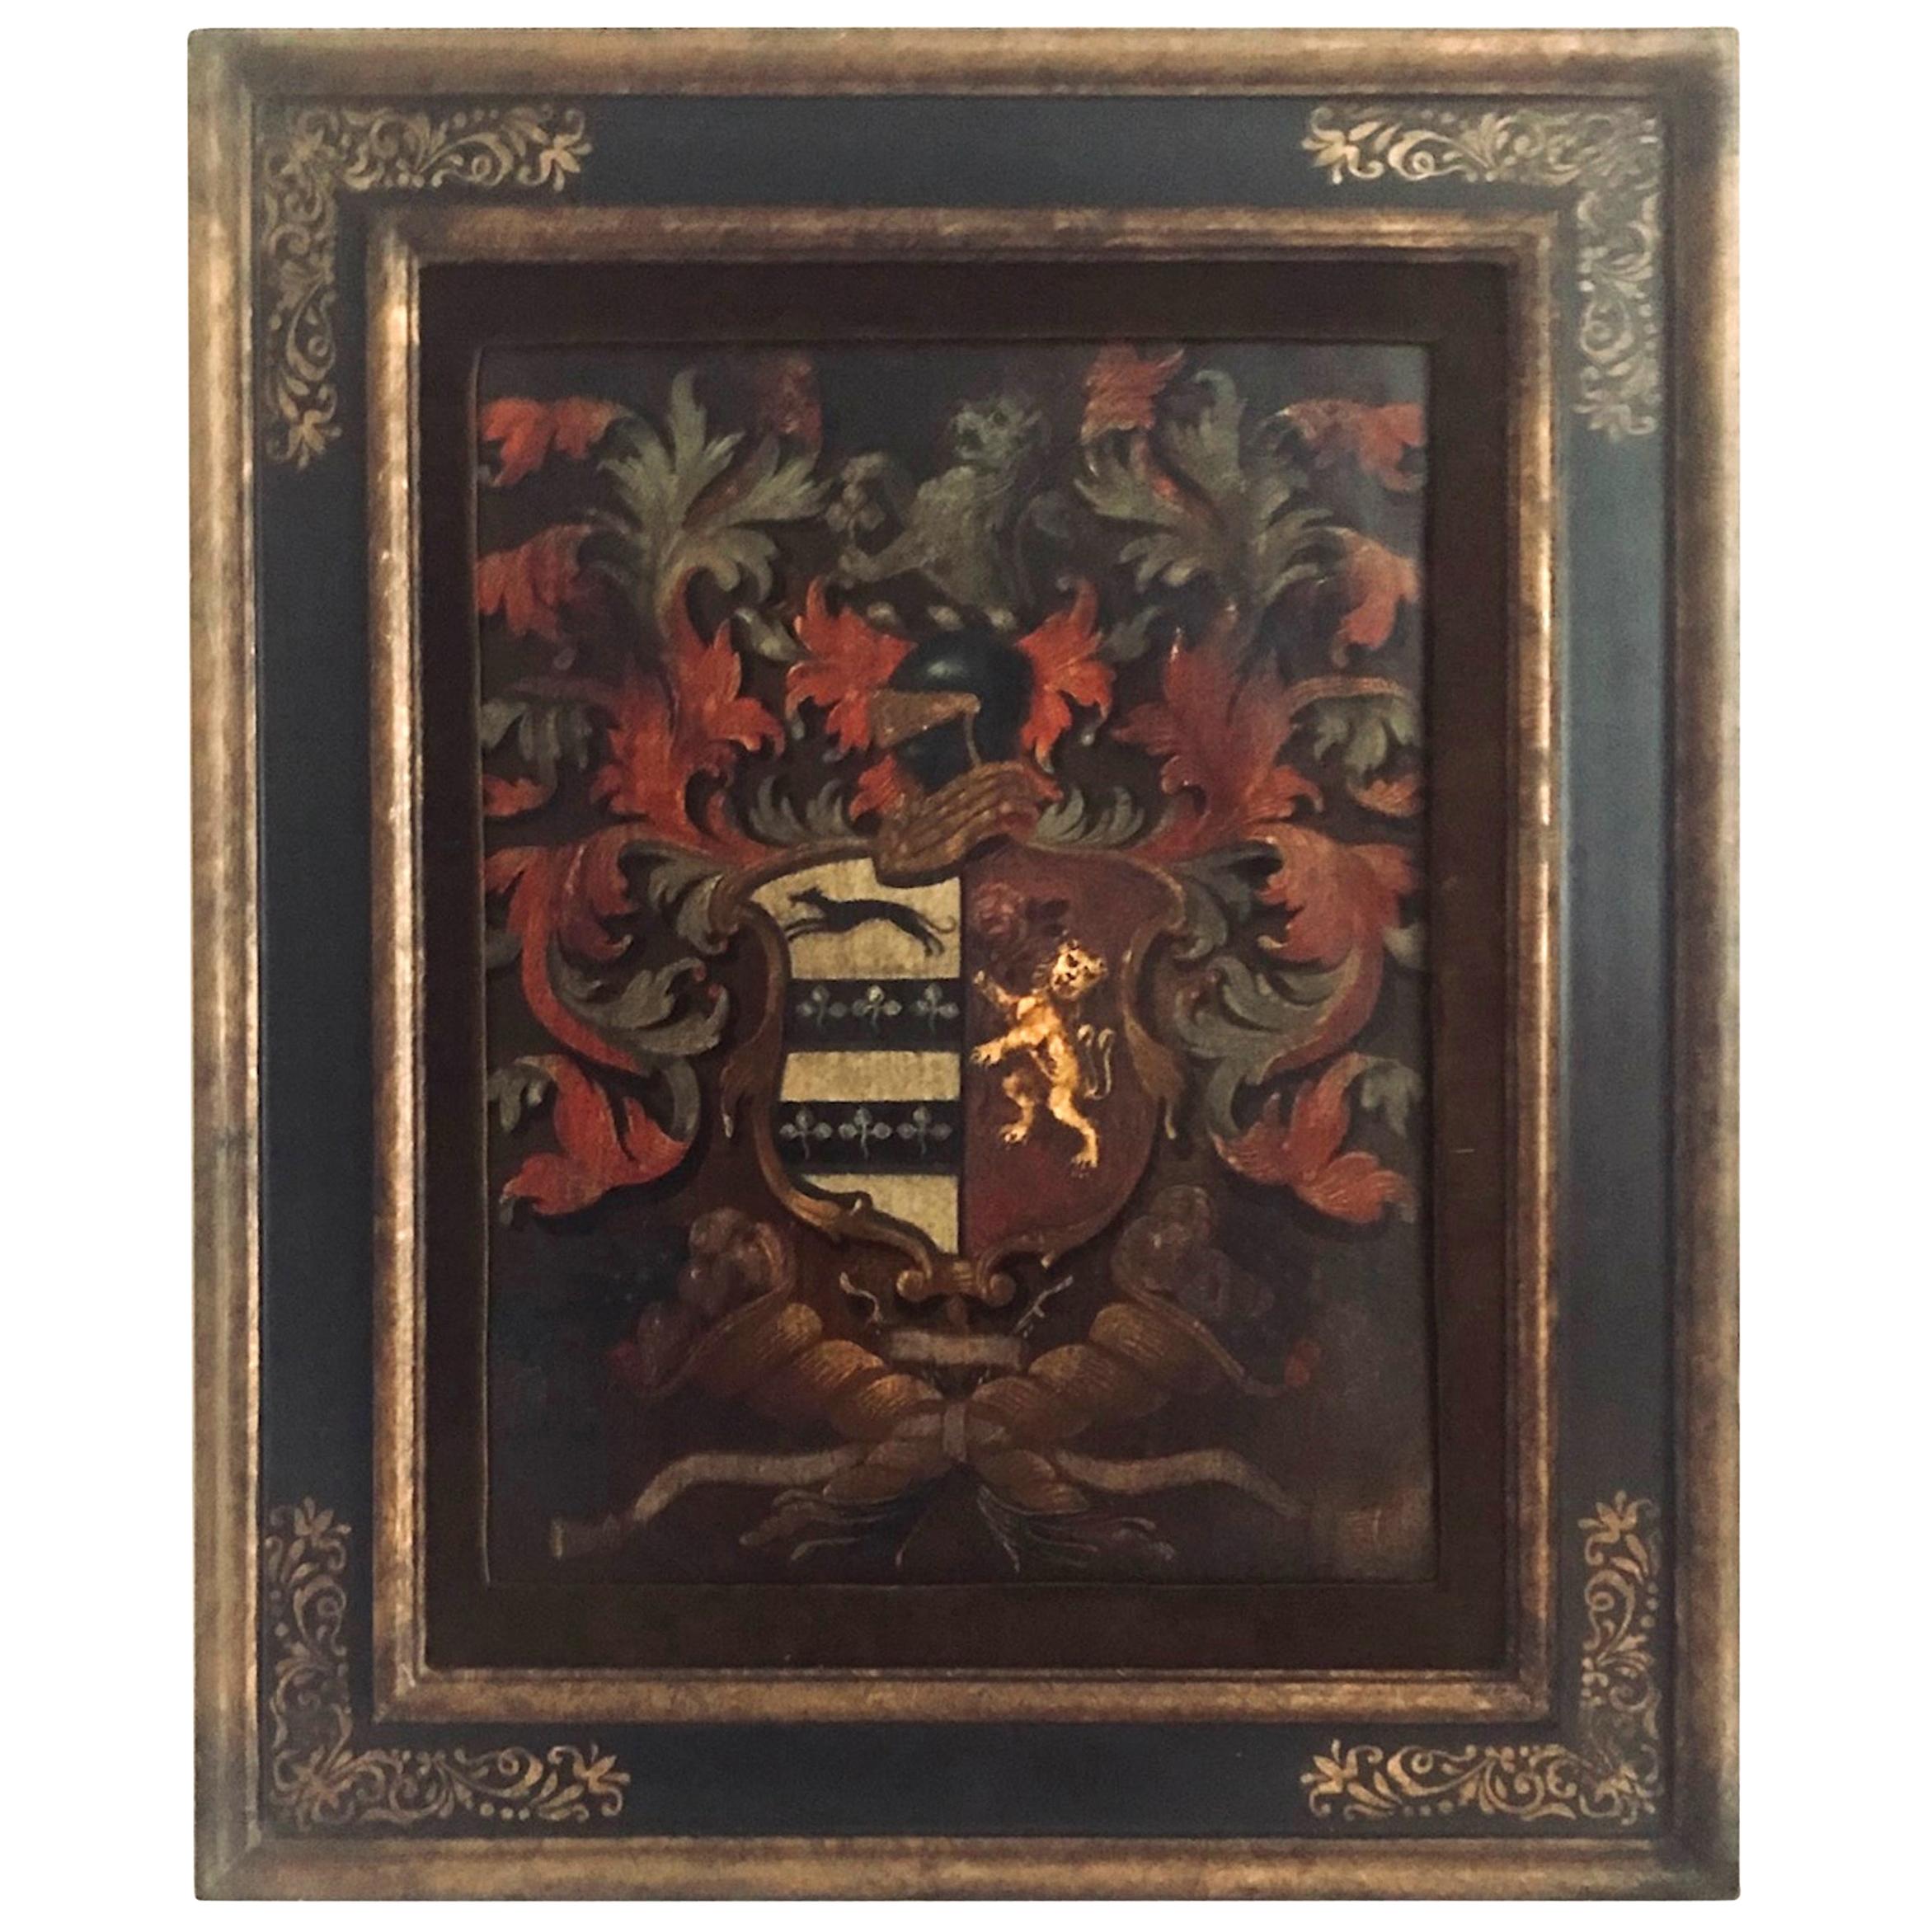 Antique English Palmer Family crest painted oil on board 

Elaborate crest painting of the English Palmer family of Dorney Court of Buckinghamshire. The colorful crest was masterfully and artistically painted in 1824. It is accompanied by the